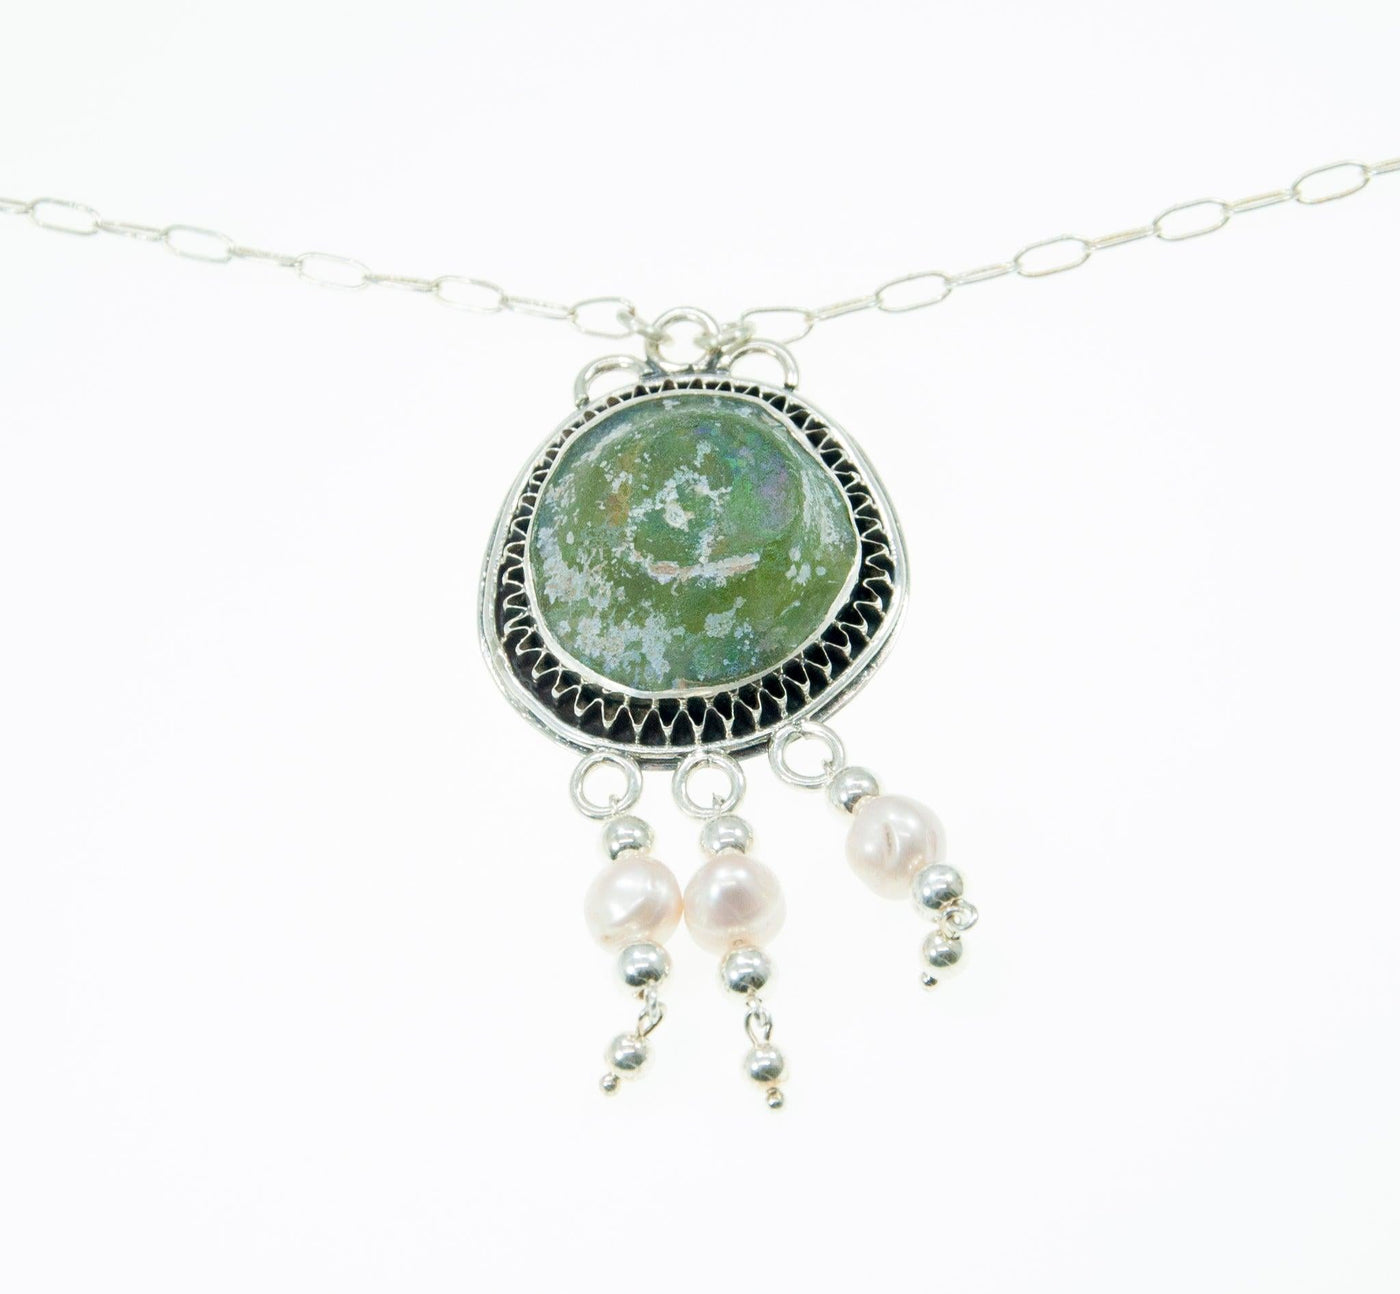 Roman Glass Pendant Authentic & Luxurious With Certificate from Holyland - Spring Nahal